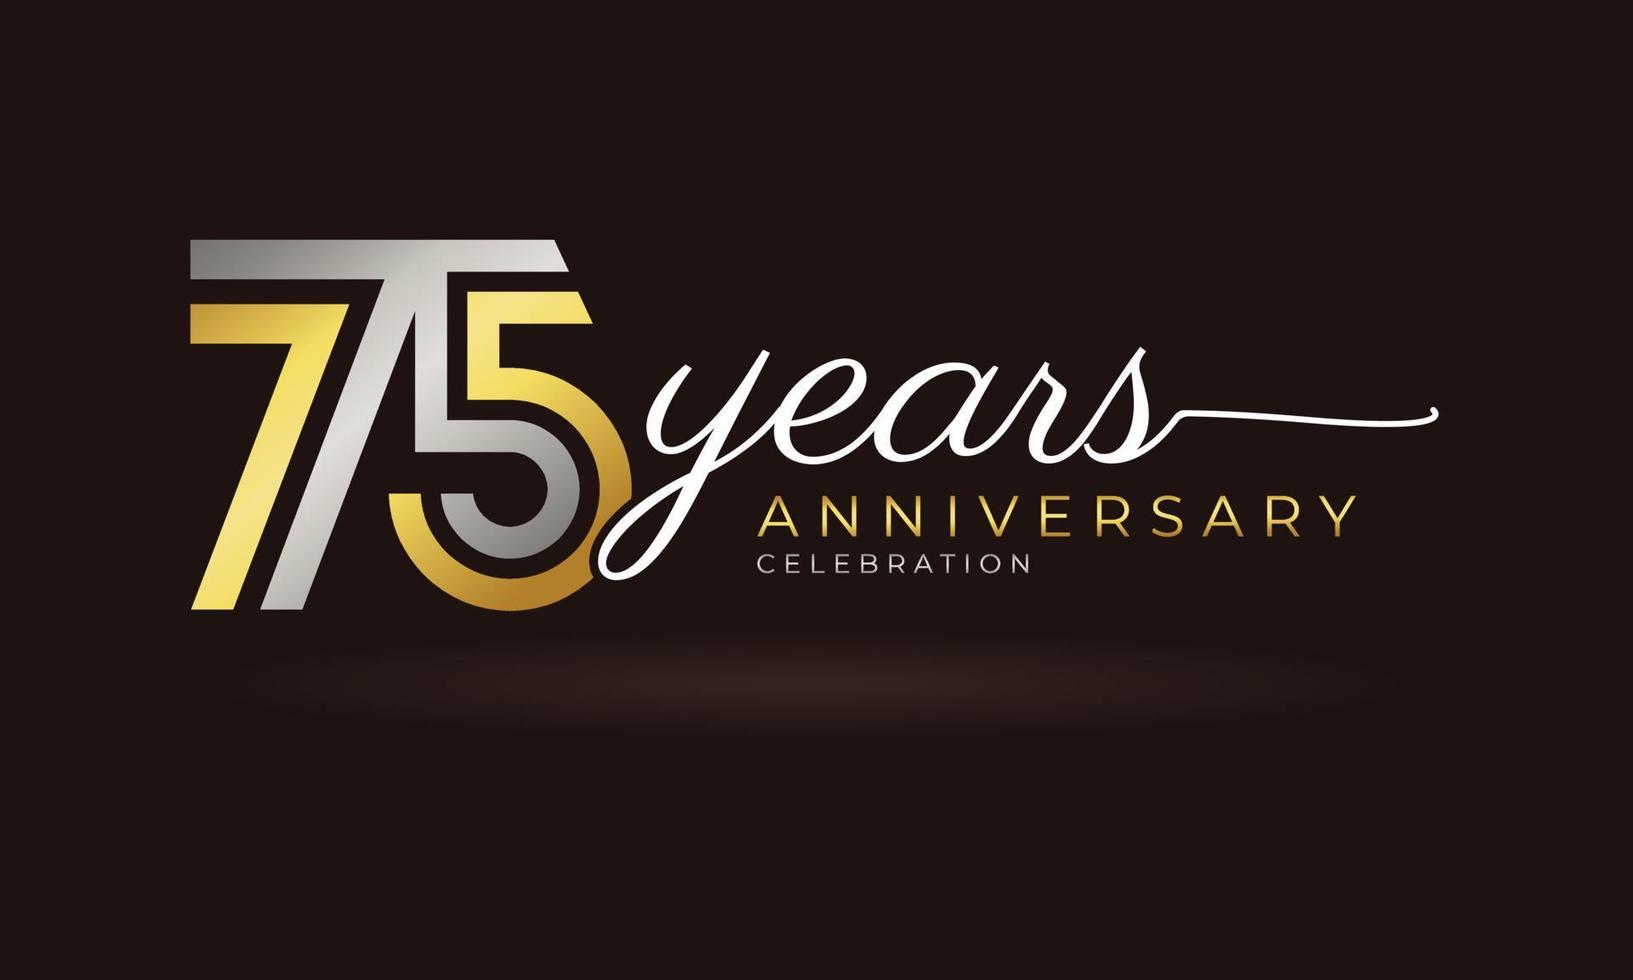 75 Year Anniversary Celebration Logotype with Linked Multiple Line Silver and Golden Color for Celebration Event, Wedding, Greeting Card, and Invitation Isolated on Dark Background vector